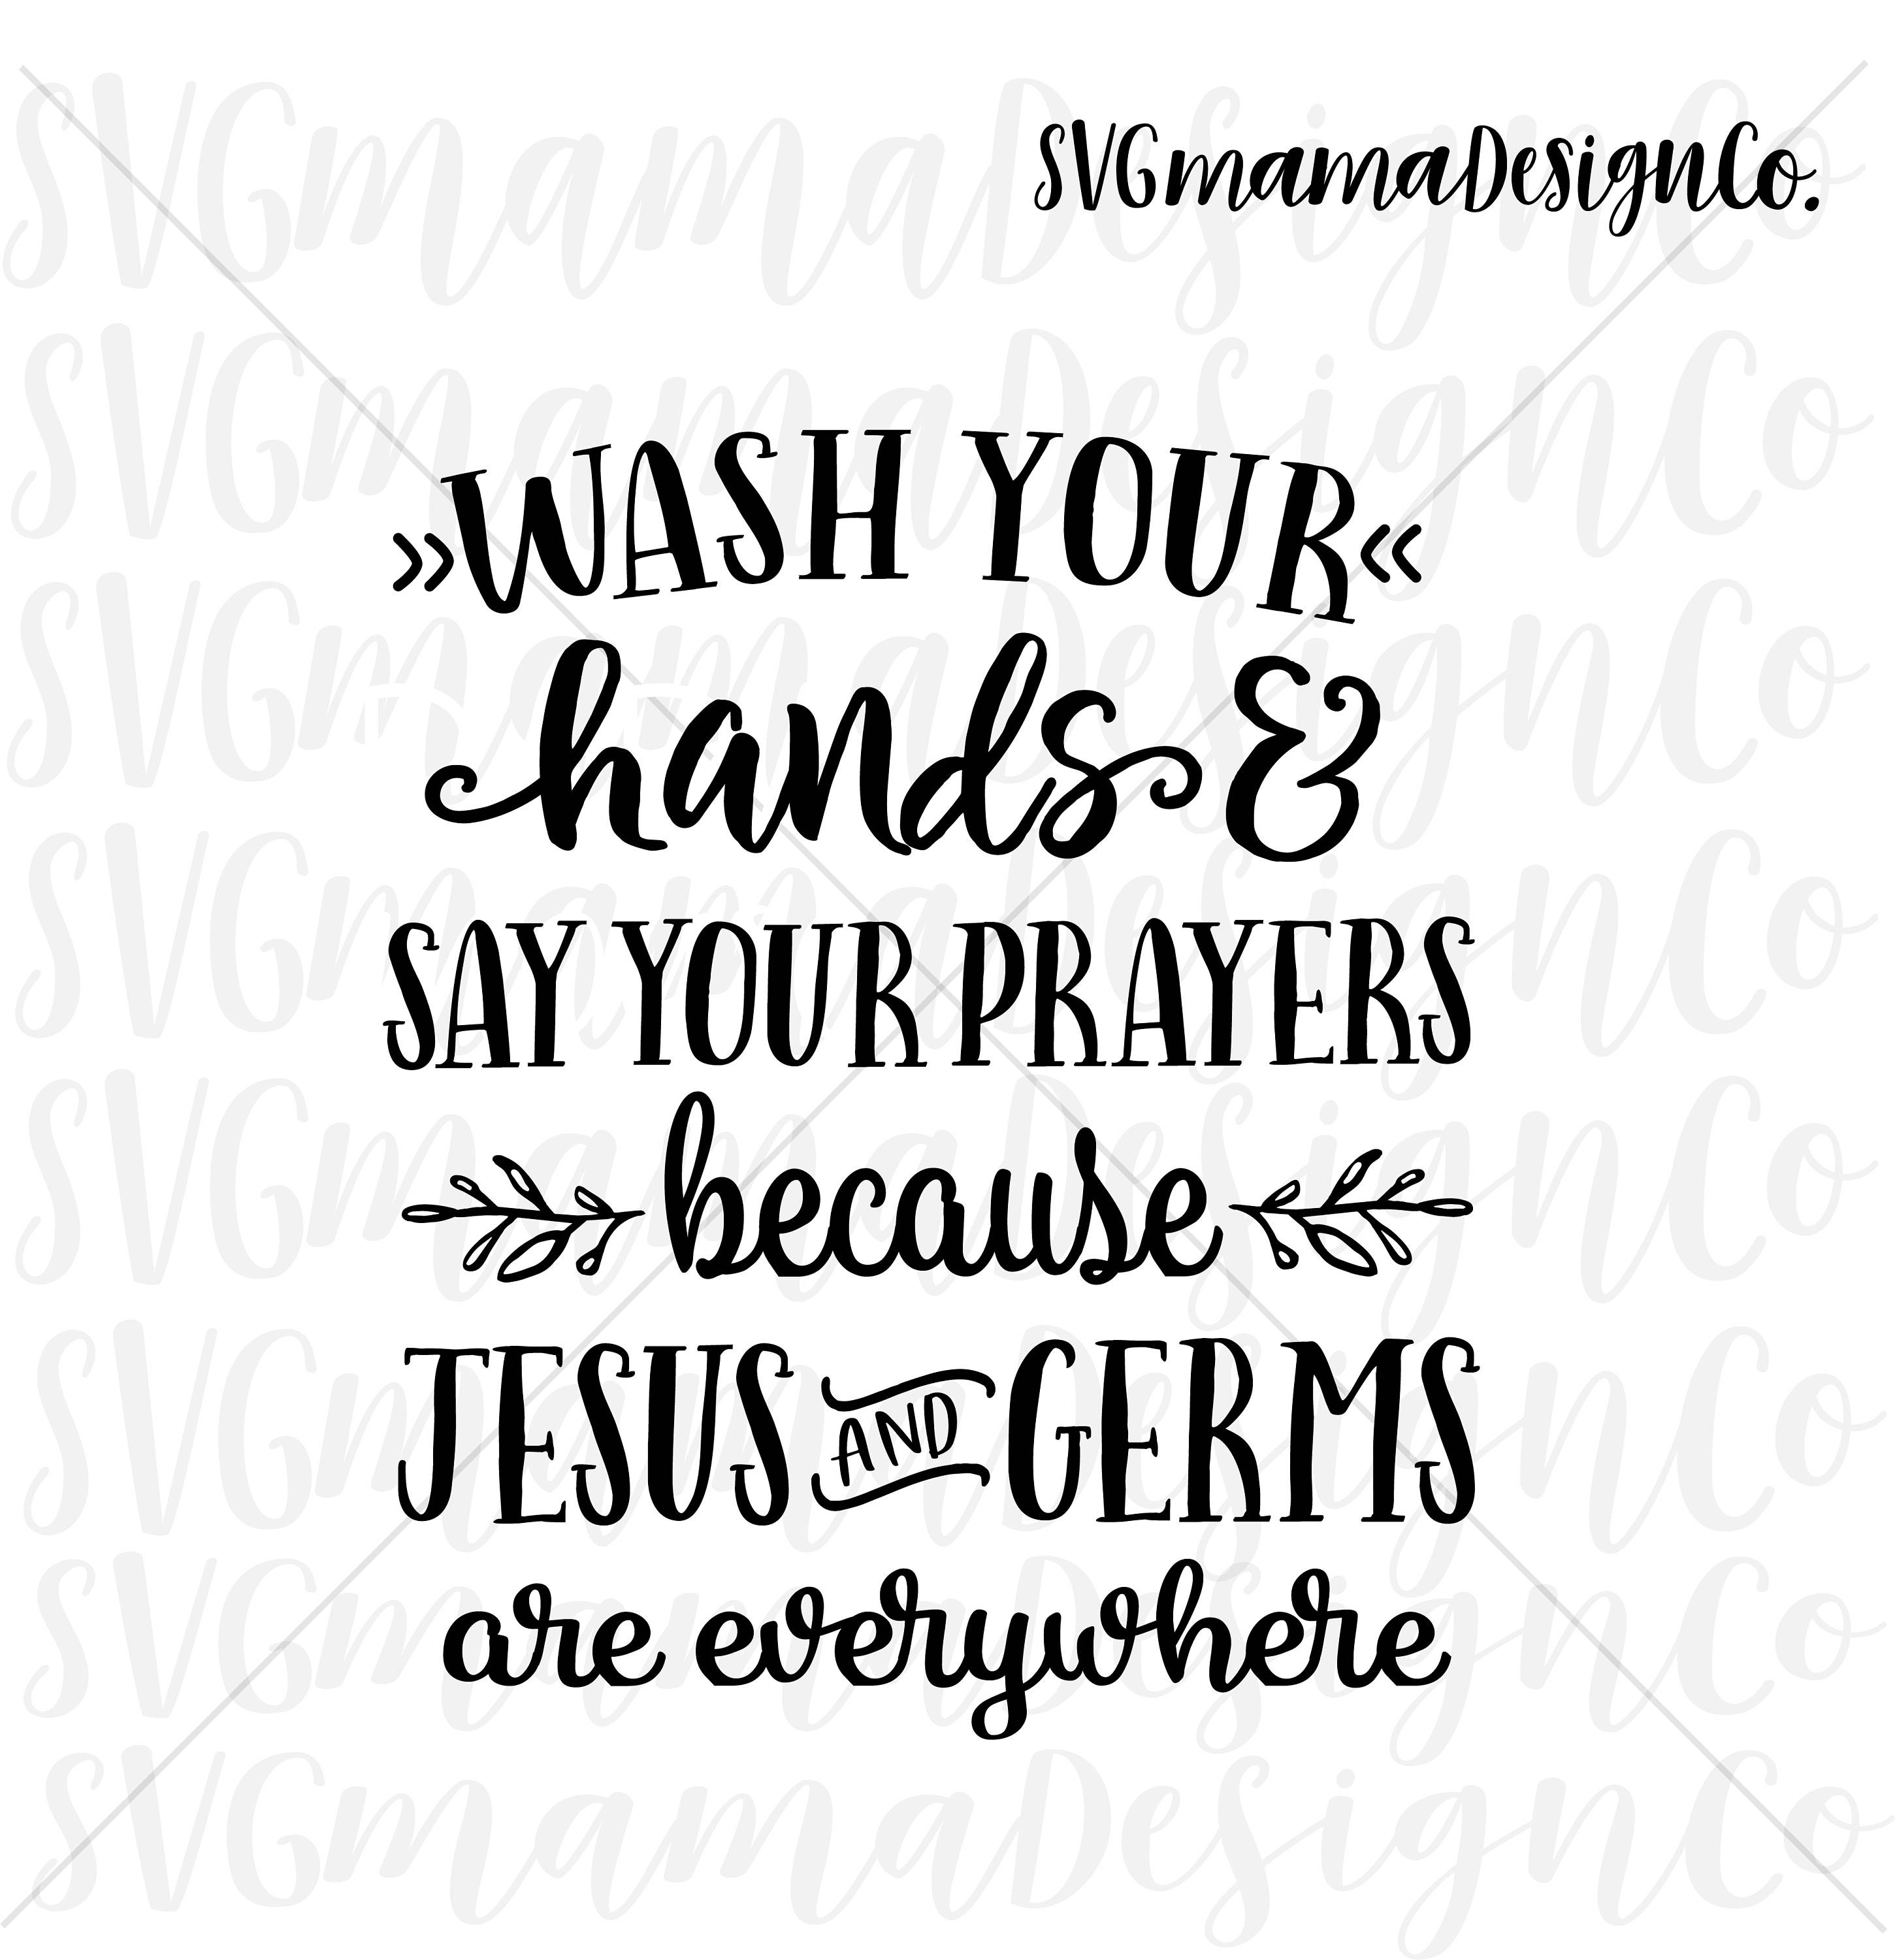 Wash Your Hands Say Your Prayers Svg Vector Image Cut File For | Etsy - Wash Your Hands And Say Your Prayers Free Printable